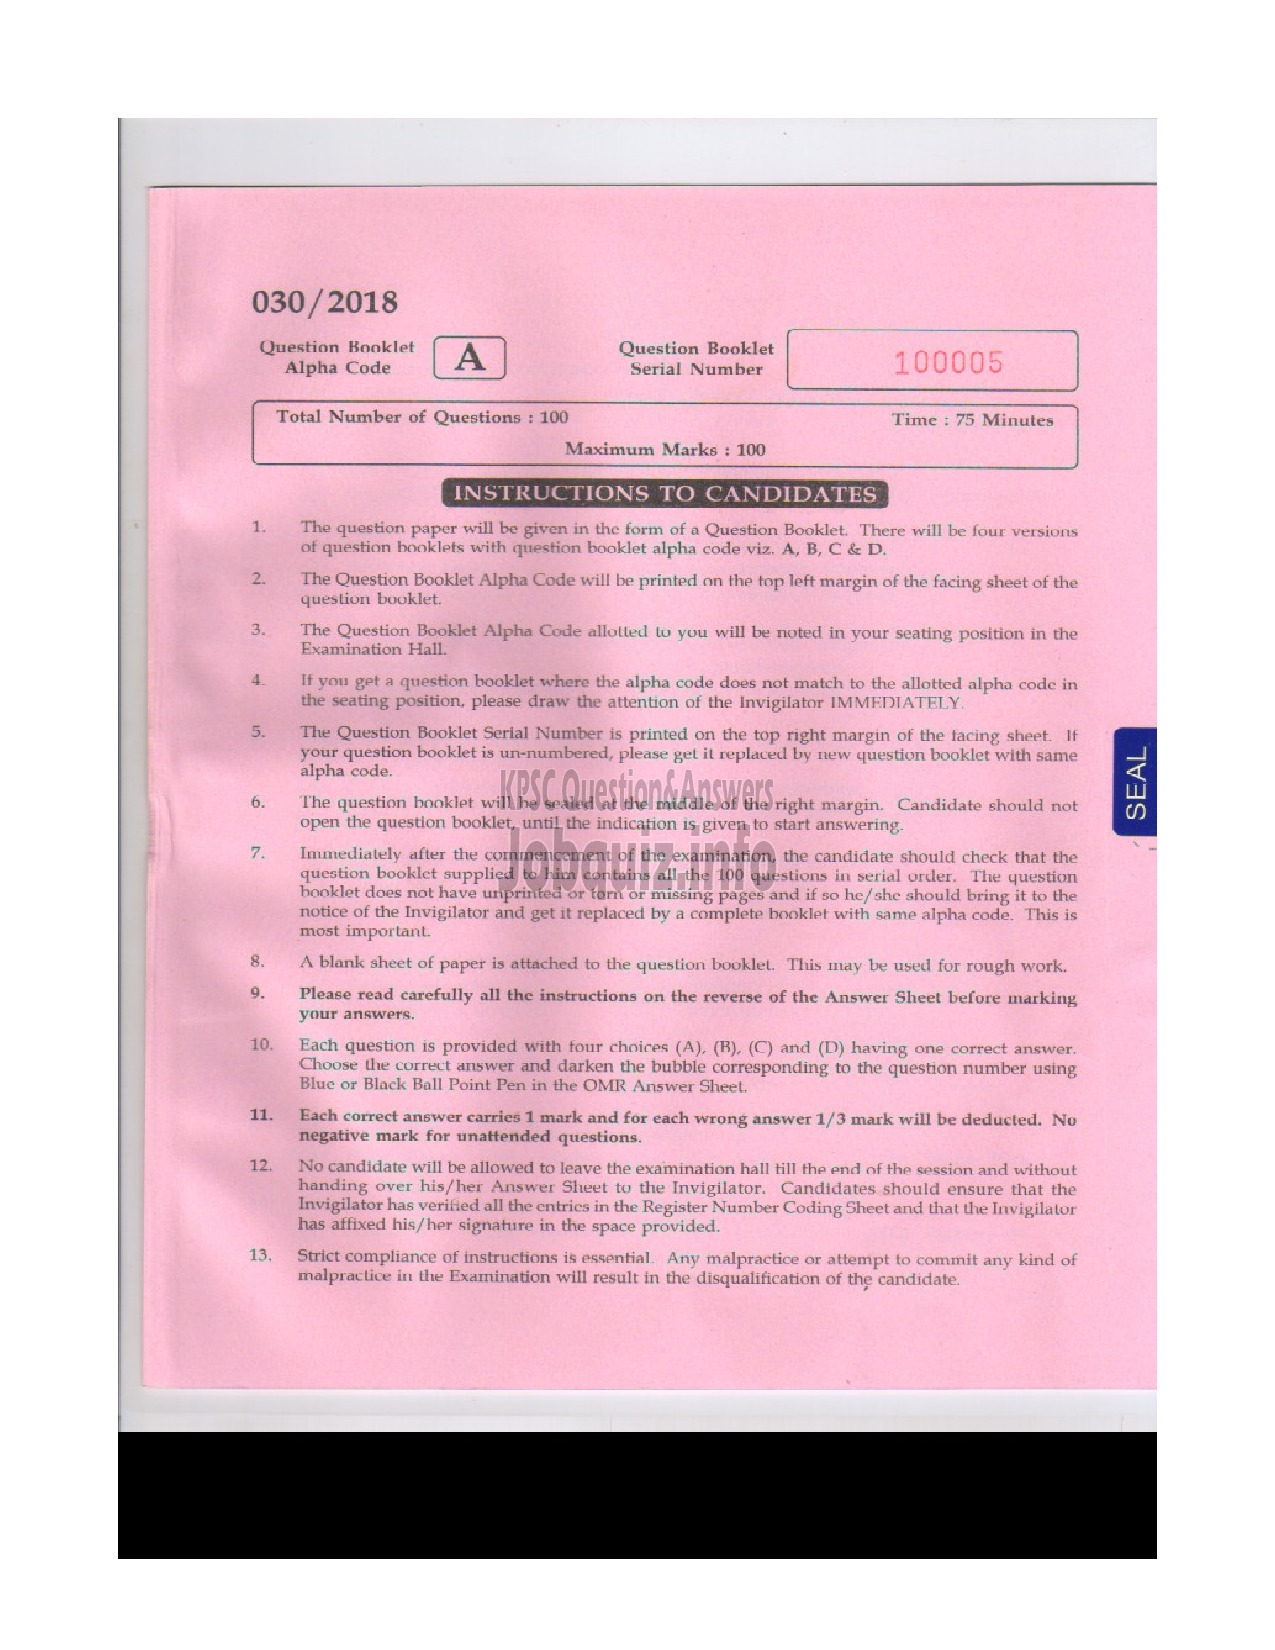 Kerala PSC Question Paper - SENIOR LECTURER IN PAEDIATRIC SURGERY MEDICAL EDUCATION-1